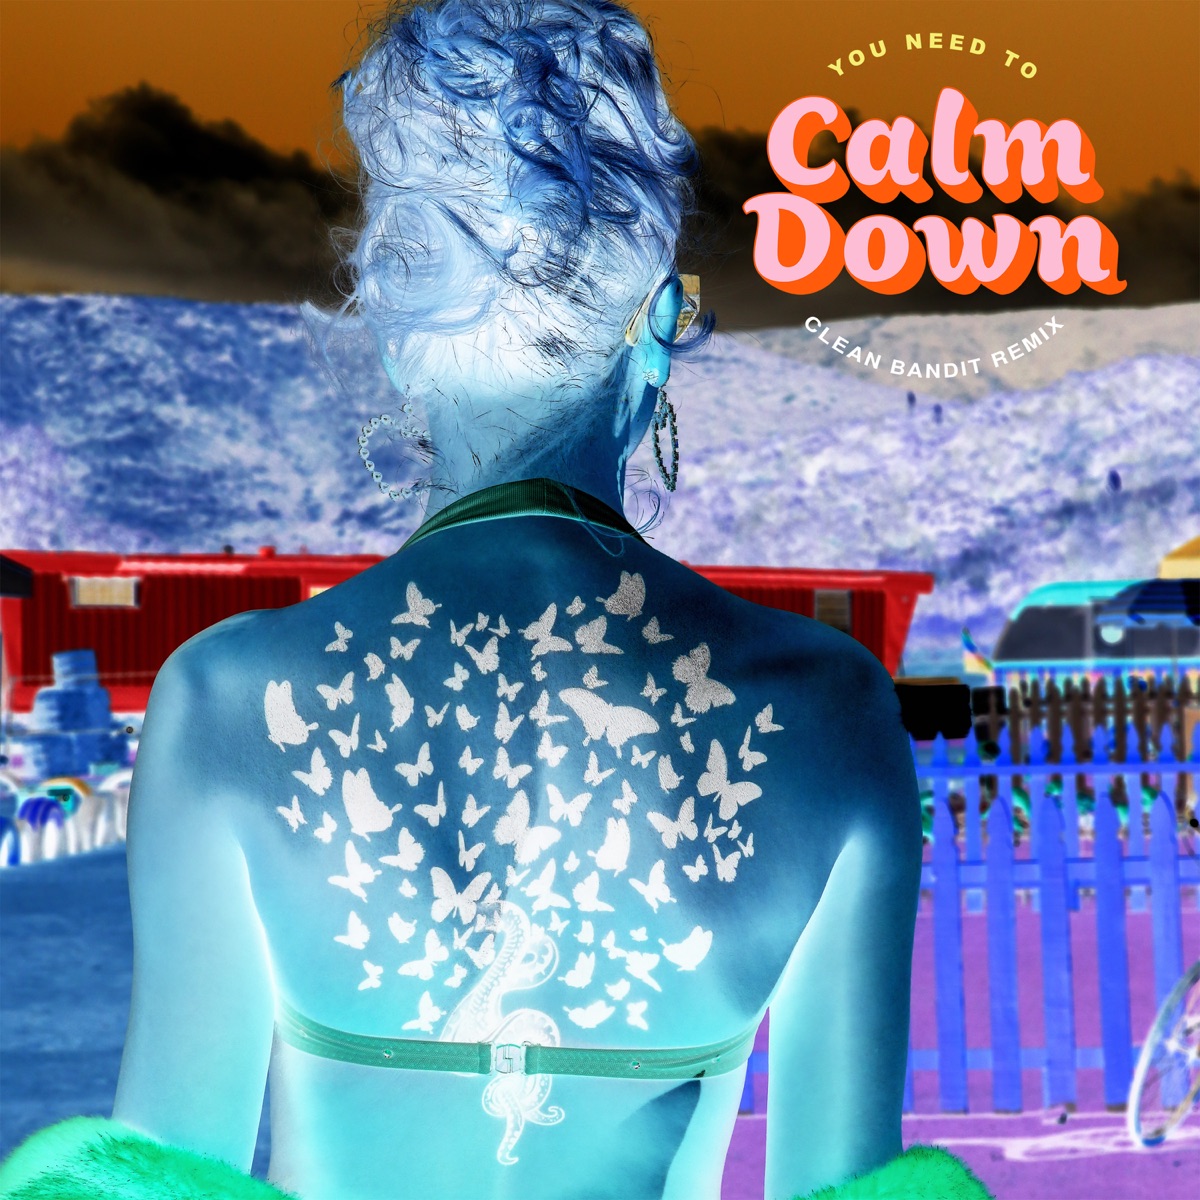 You Need To Calm Down Album Cover By Taylor Swift